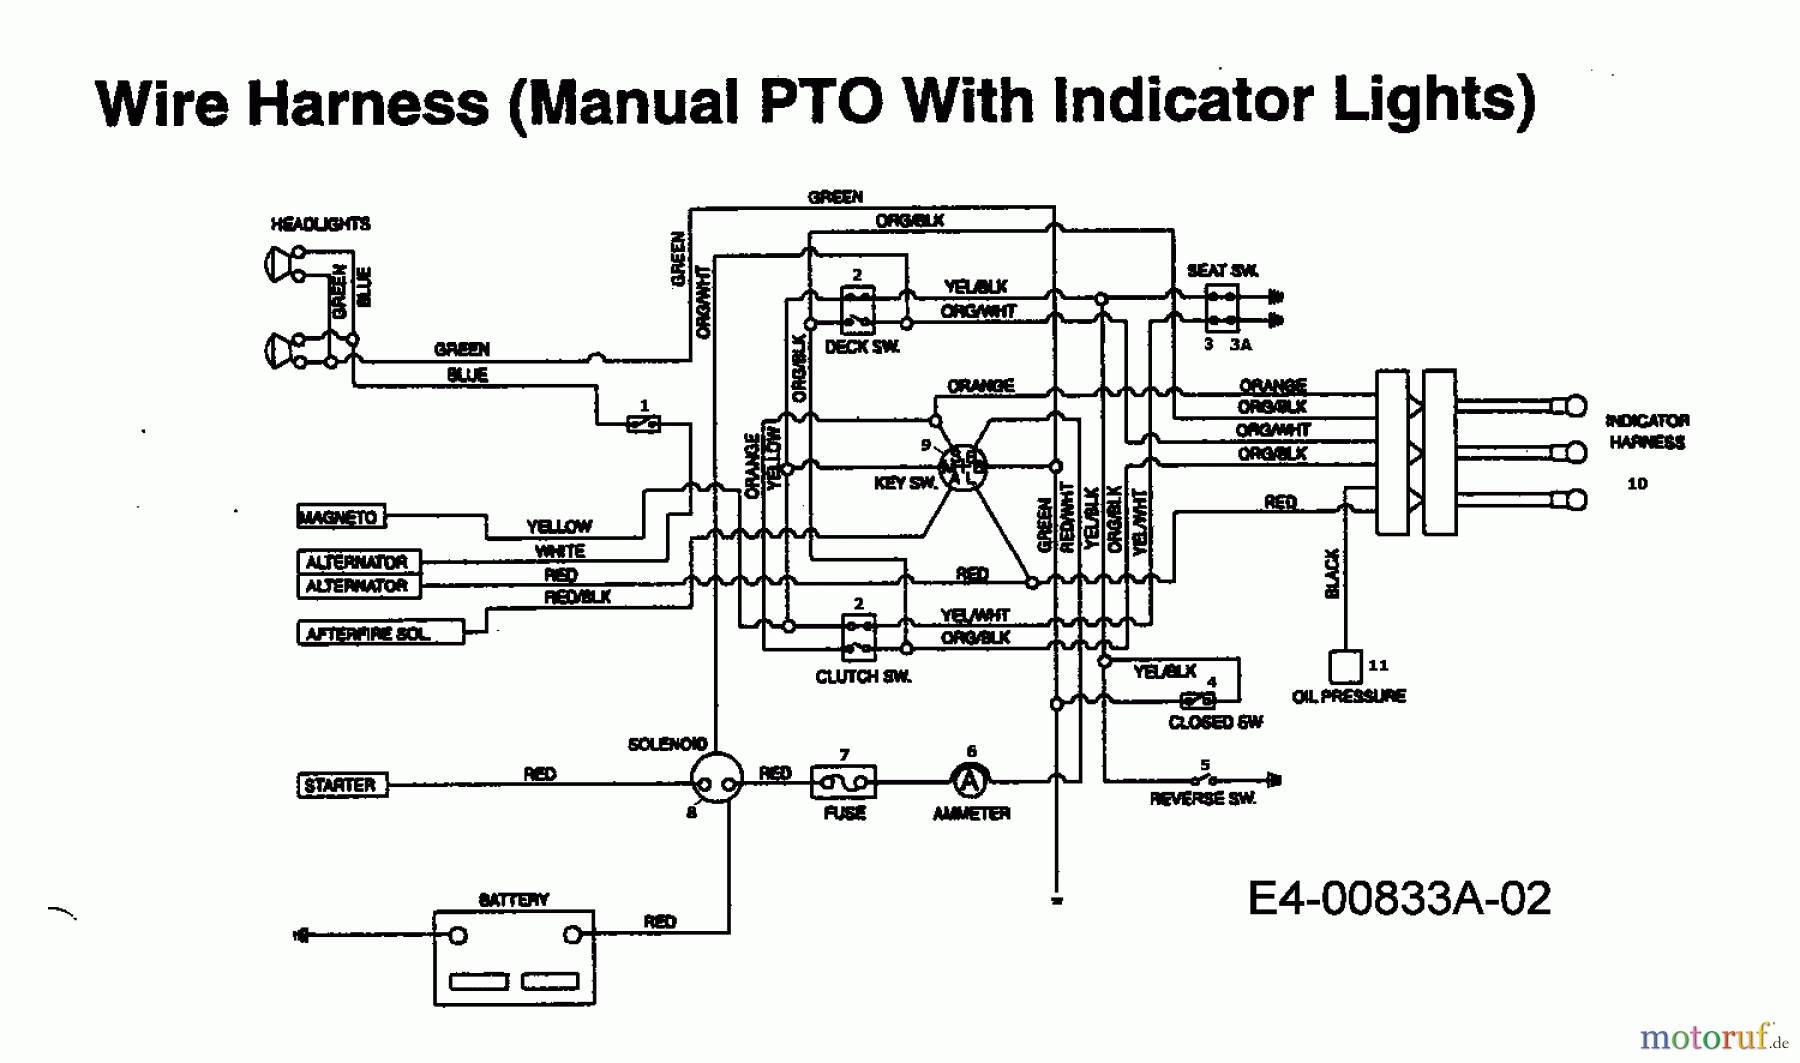  MTD Lawn tractors EH/160 13AF795N678  (1998) Wiring diagram with indicator lights